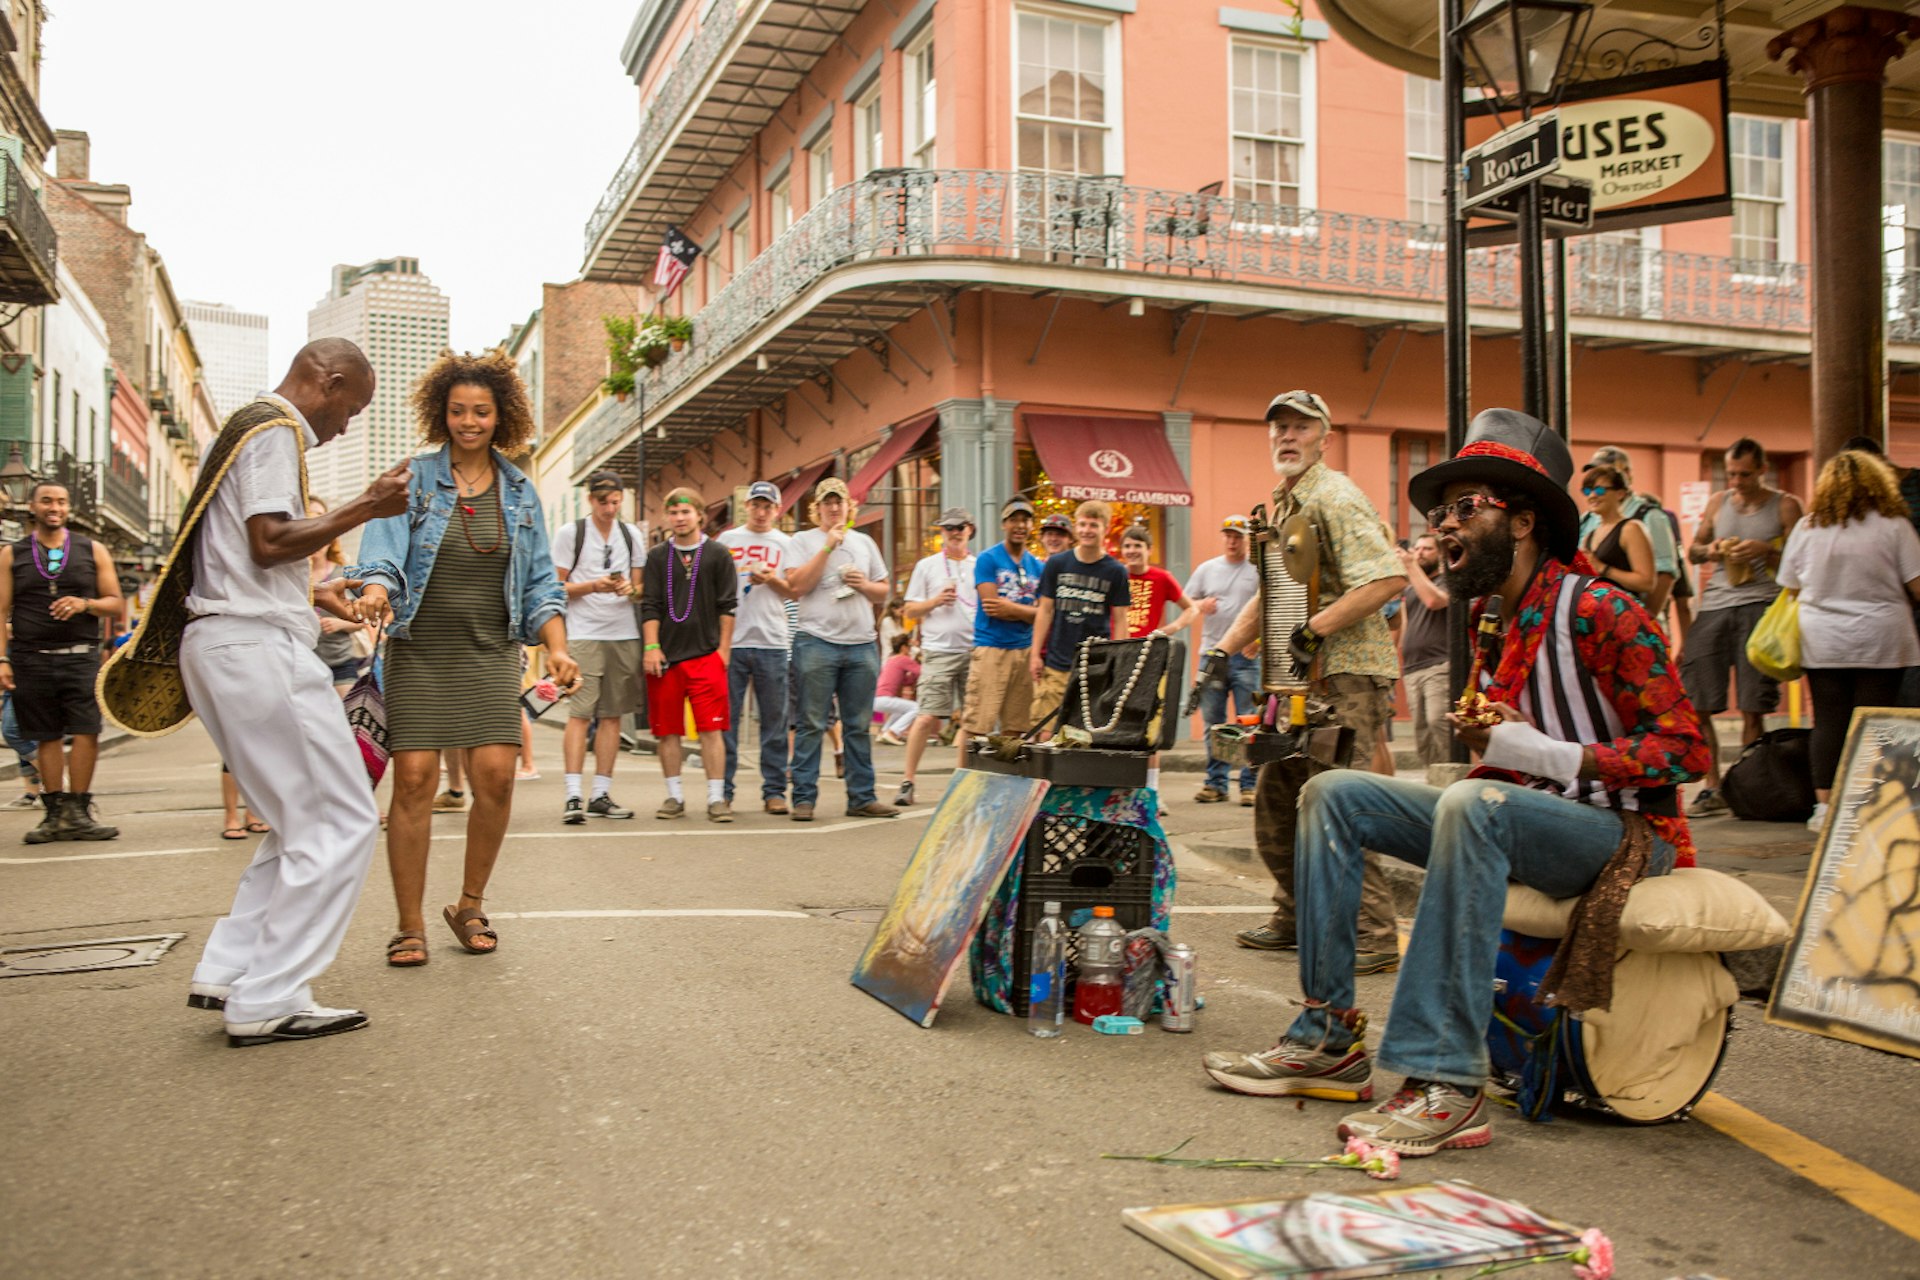 Darryl "Dancing Man" Young, a beloved local celebrity who often leads parades and second lines throughout New Orleans, dancing to music on a street corner in the French Quarter.